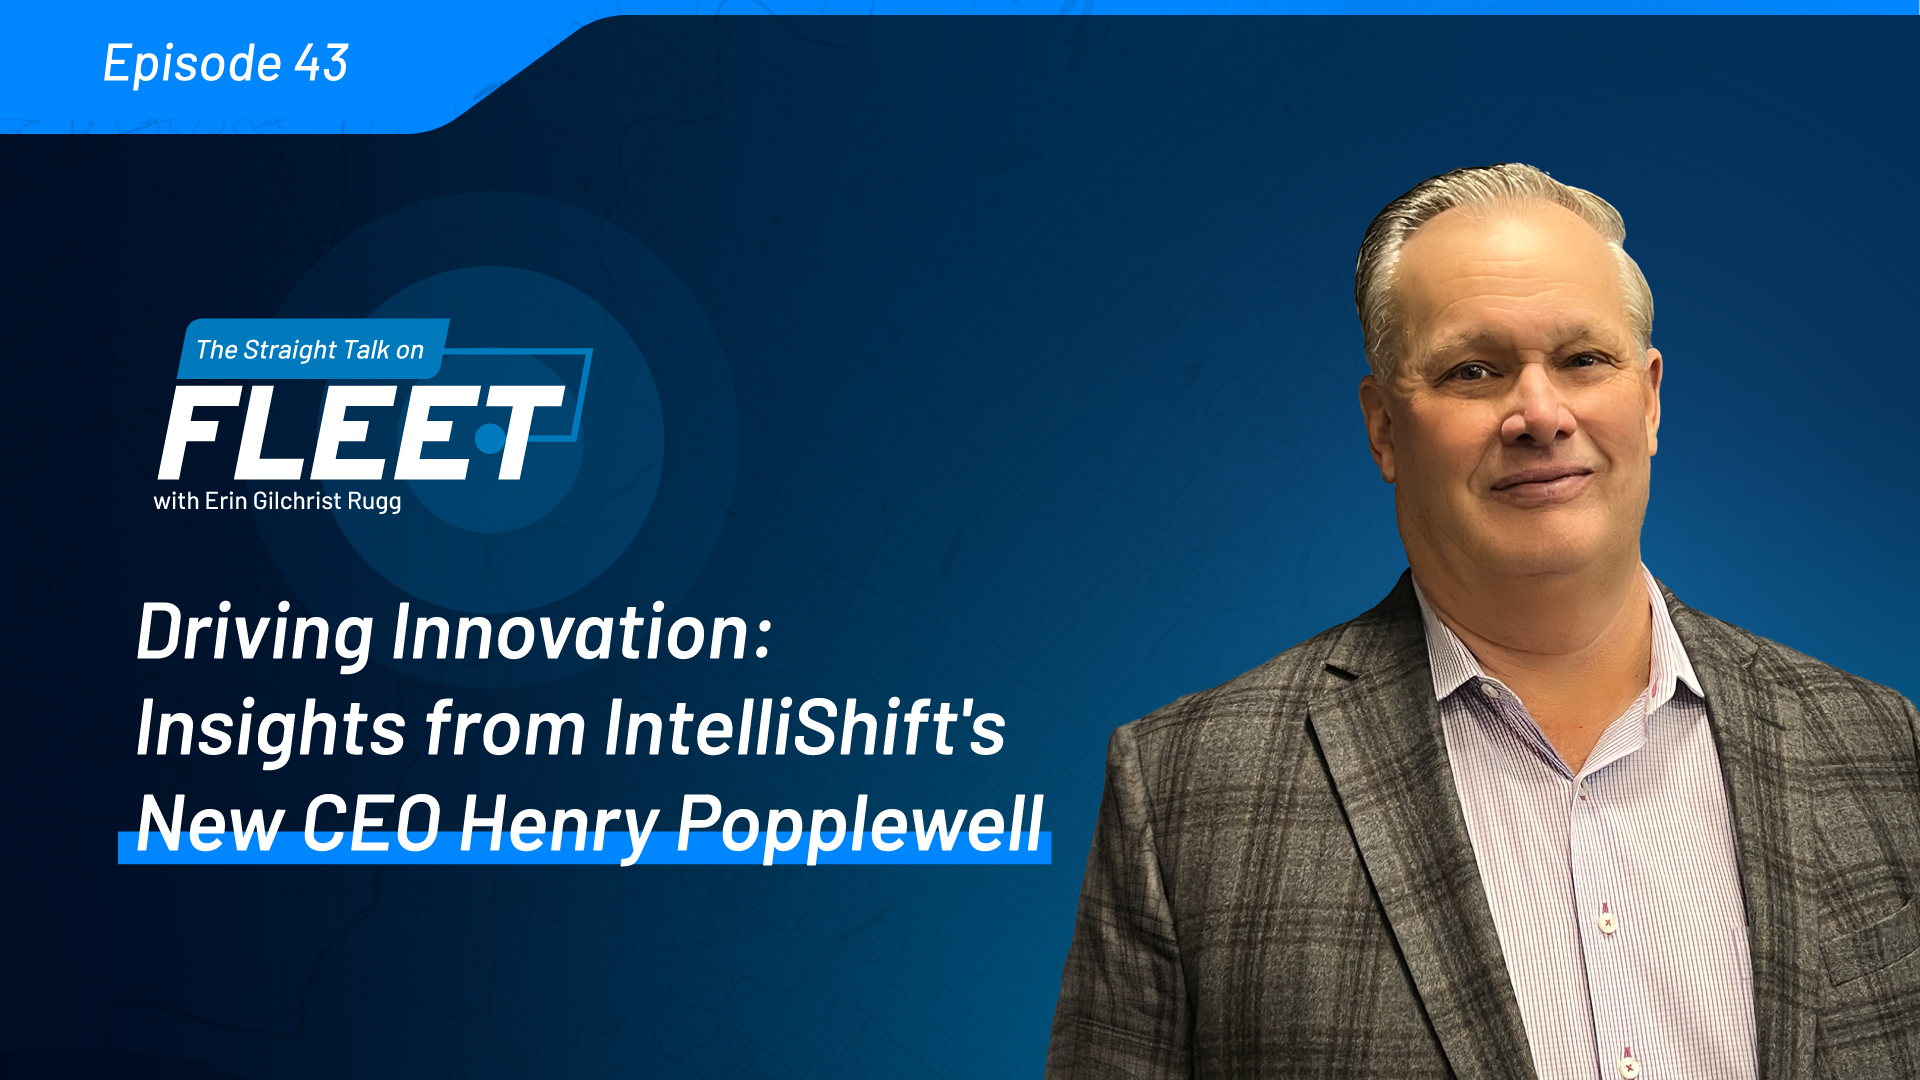 Driving Innovation: Insights from IntelliShift's New CEO Henry Popplewell